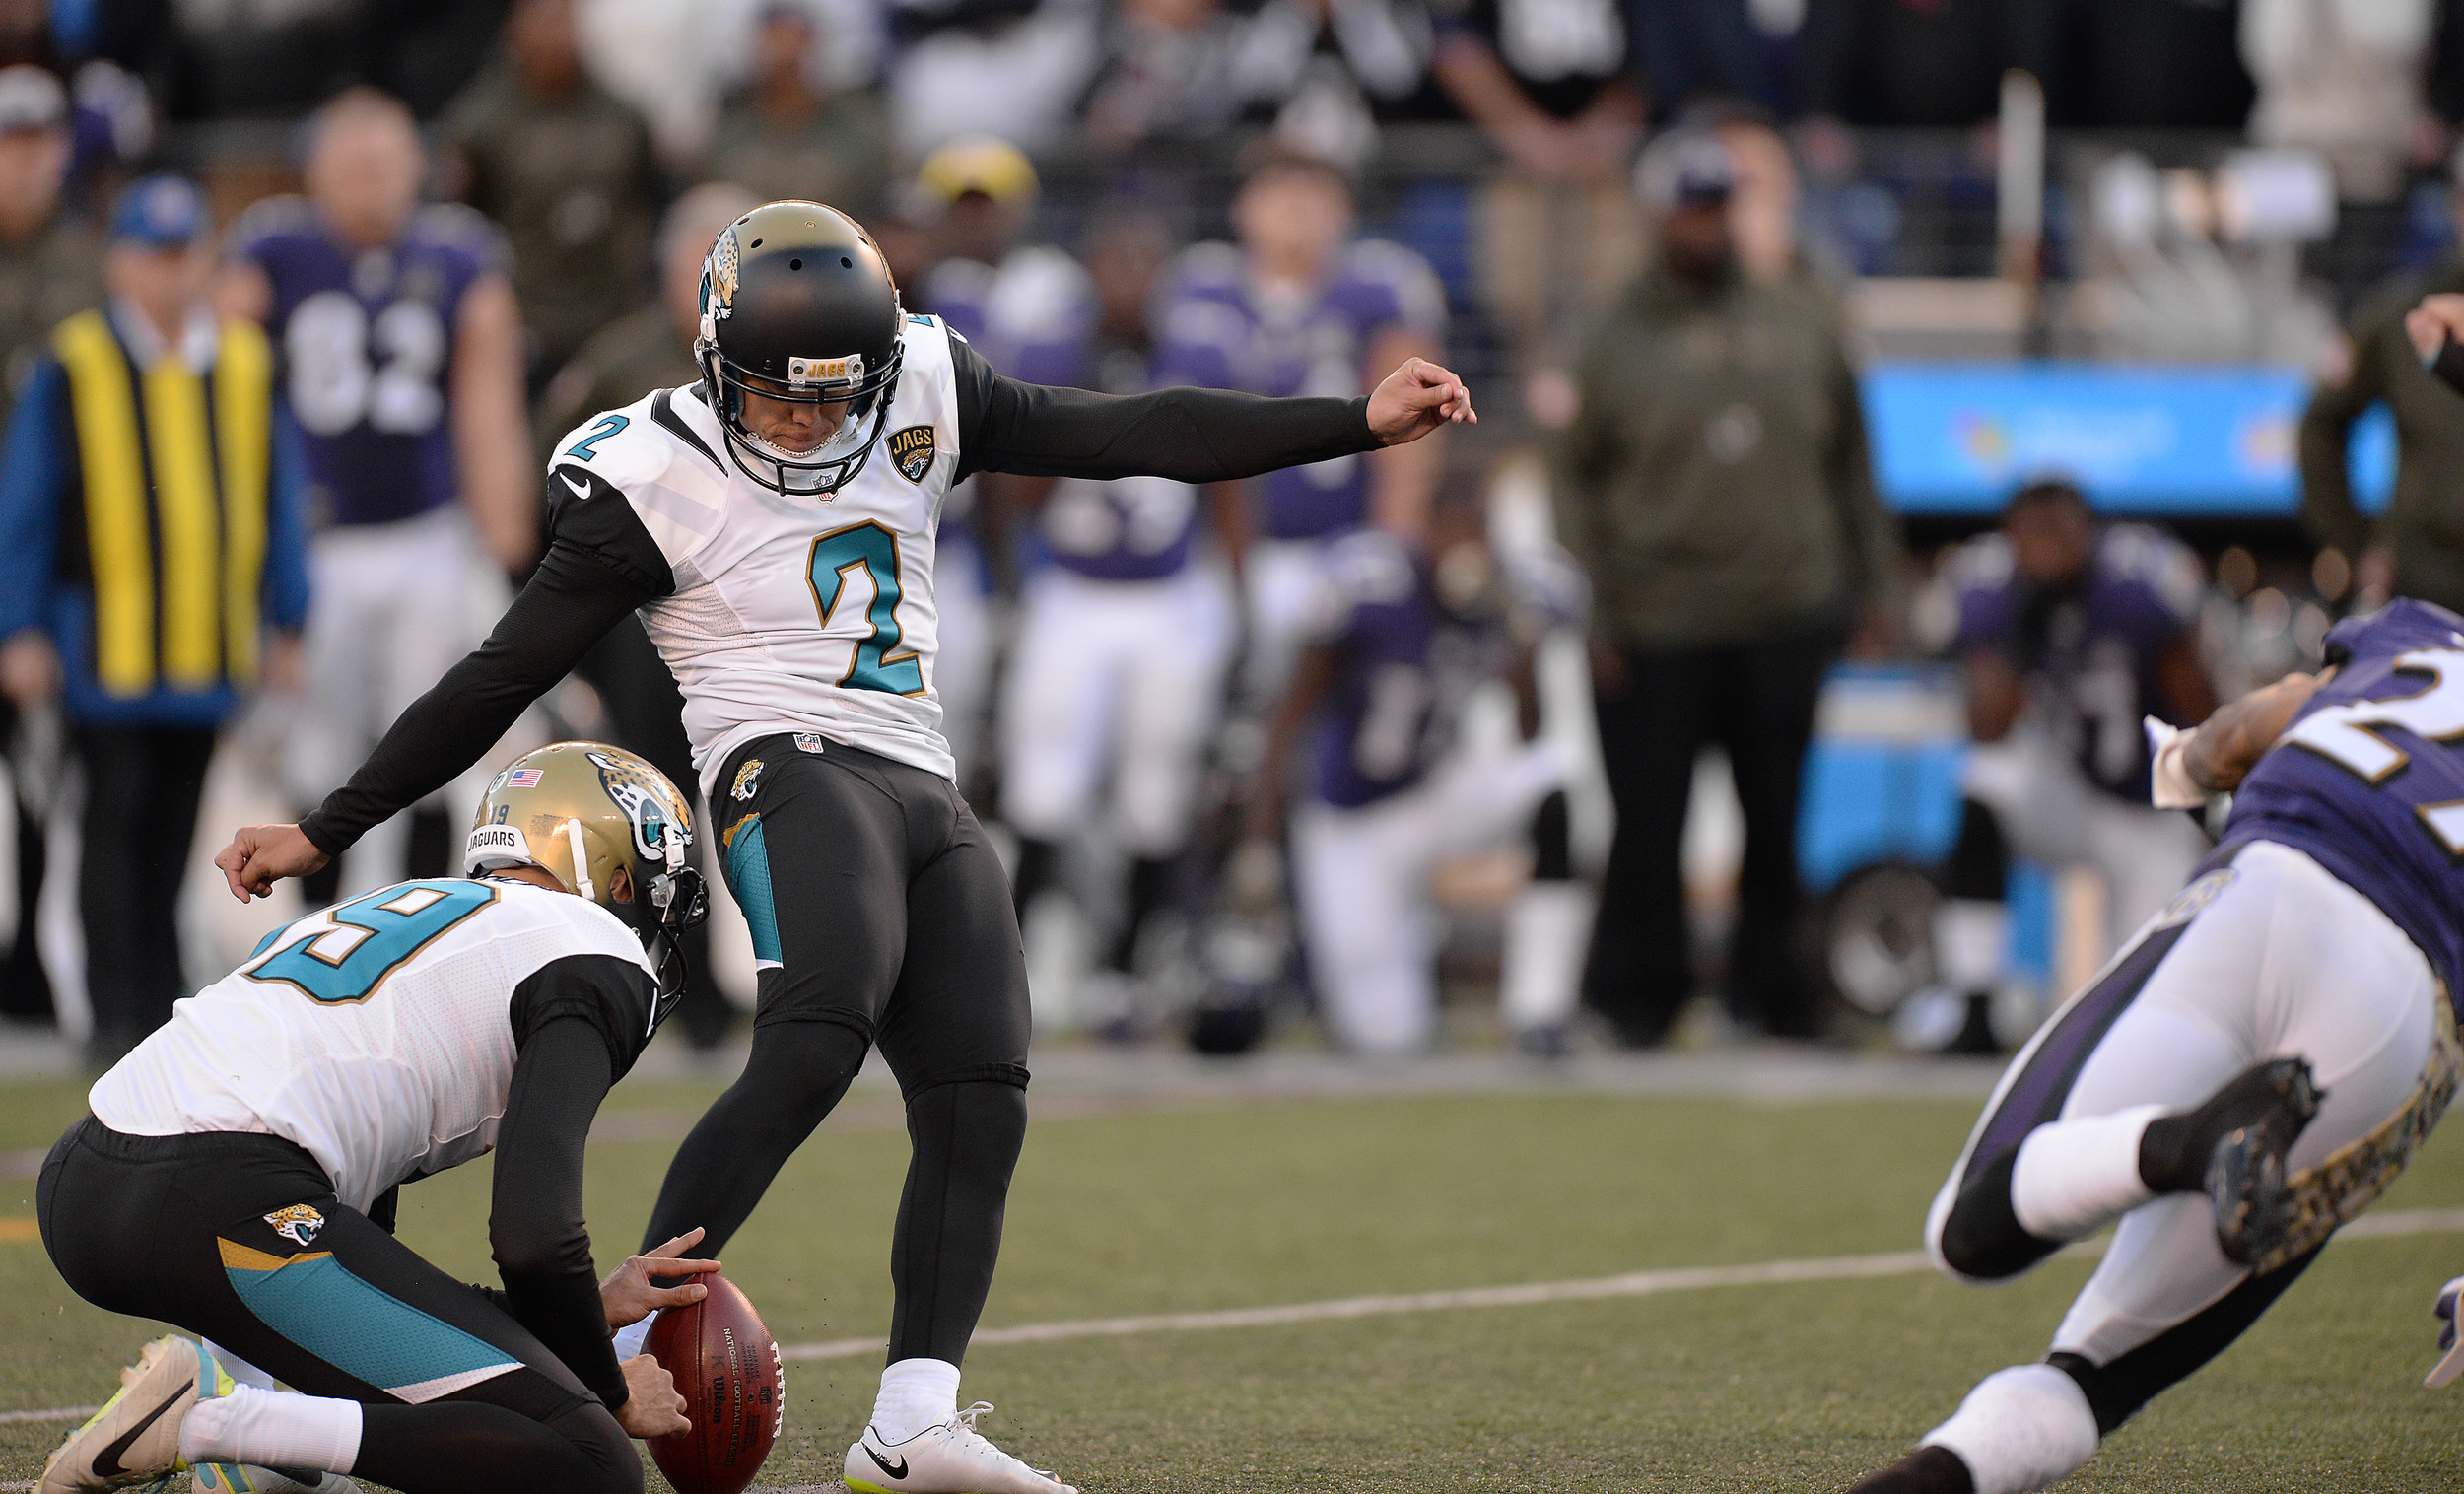 Jacksonville’s Jason Myers kicked a 53-yard field goal that gave the Jaguars a 22-20 victory over the struggling Baltimore Ravens on Sunday. The Jaguars hosted AFC South rival Tennessee Thursday night.